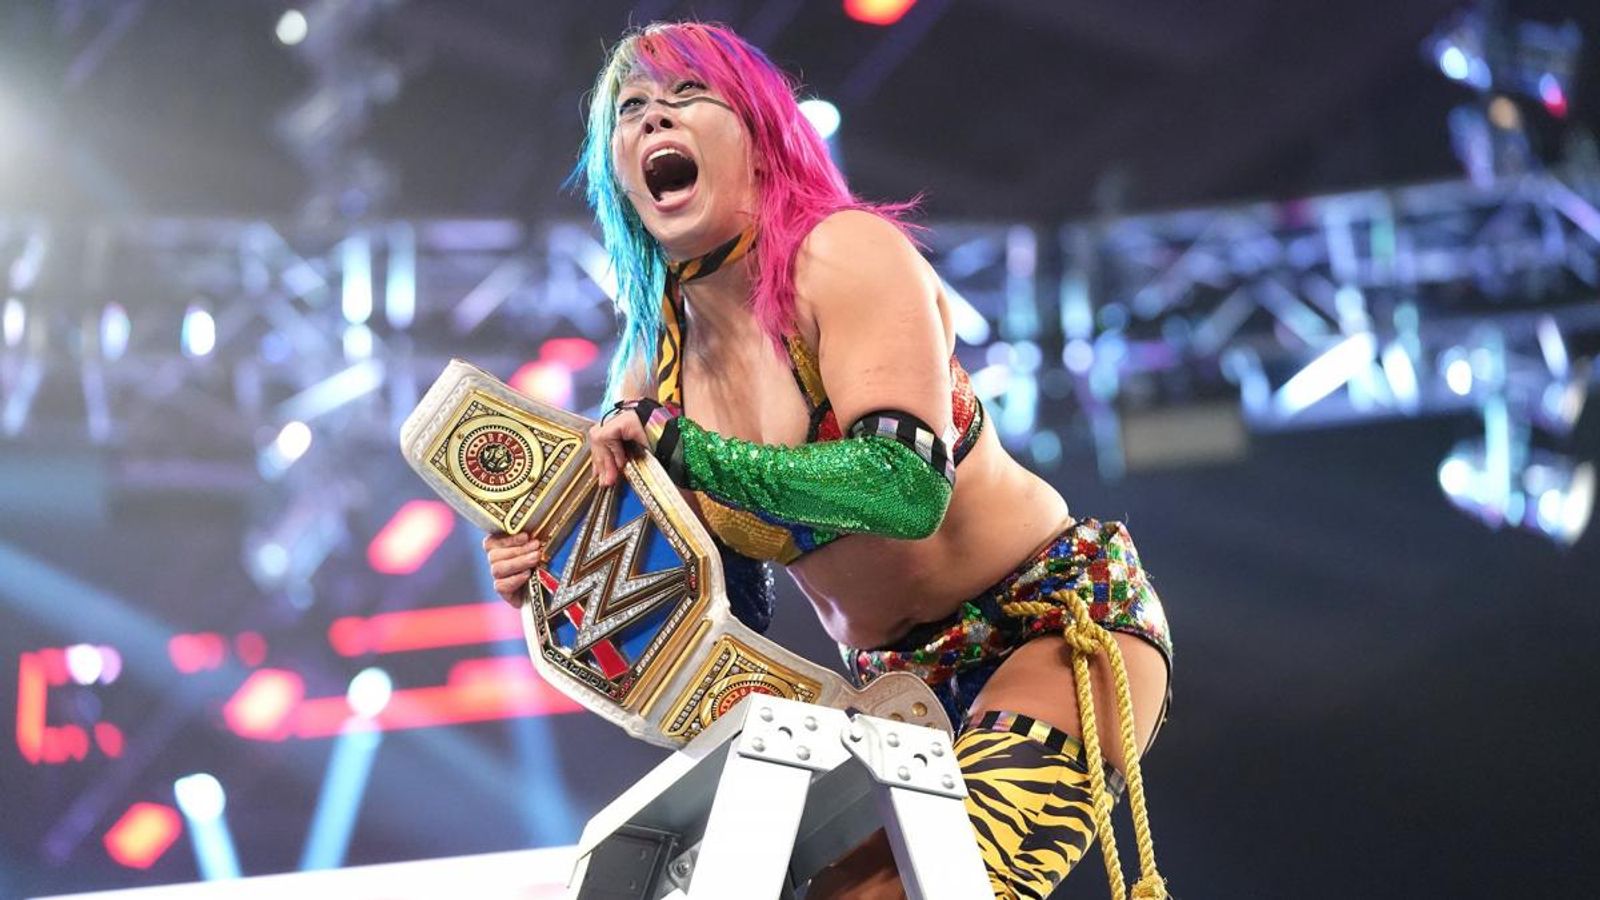 Wwe Smackdown The Era Of Asuka Begins After Tlc Title Victory Wwe